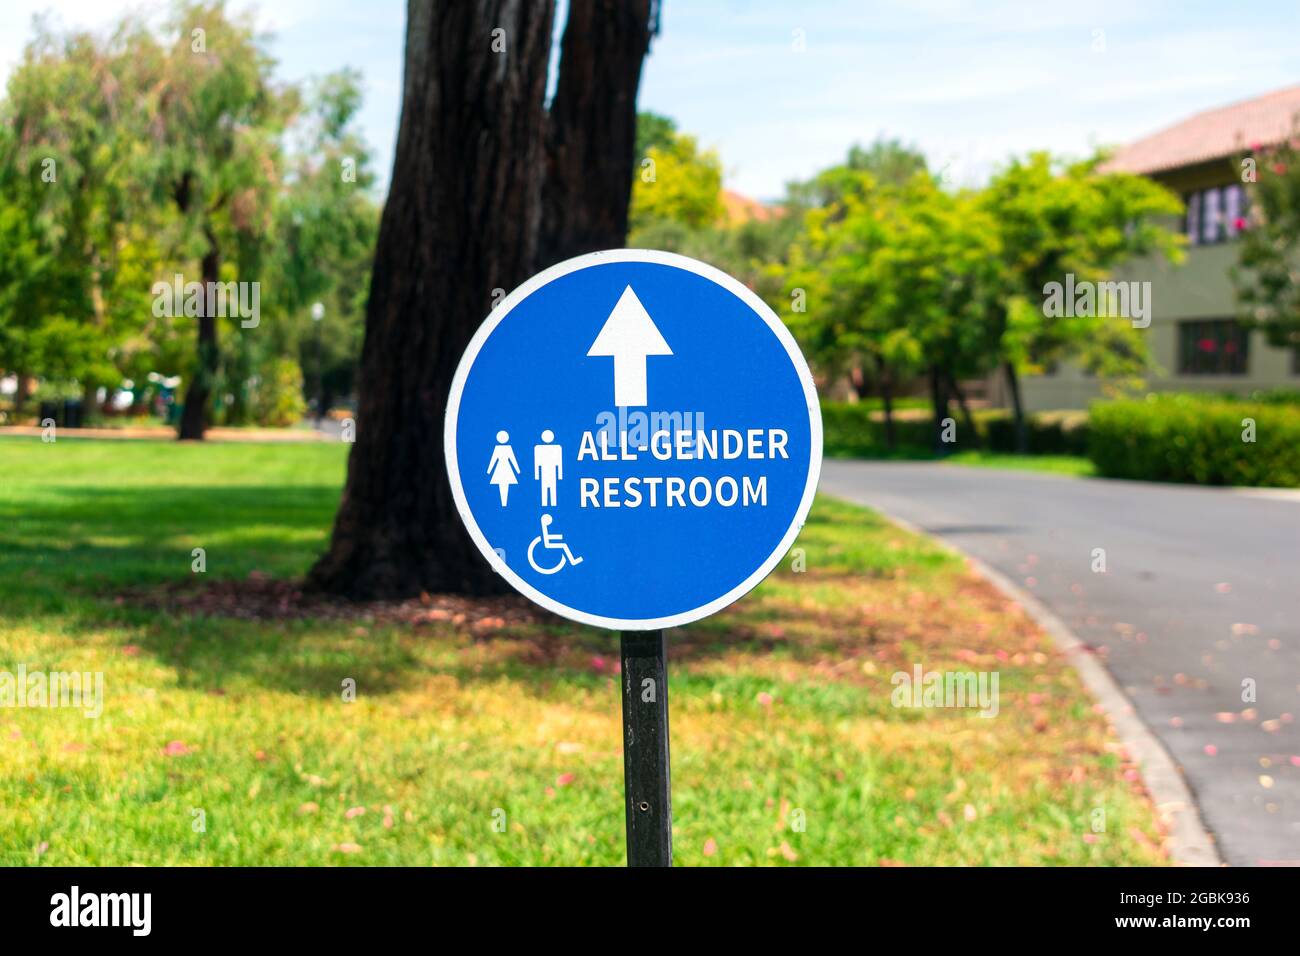 All Gender Restroom outdoor sign with directional arrow. ADA compliant gender neutral outdoor signage. Stock Photo